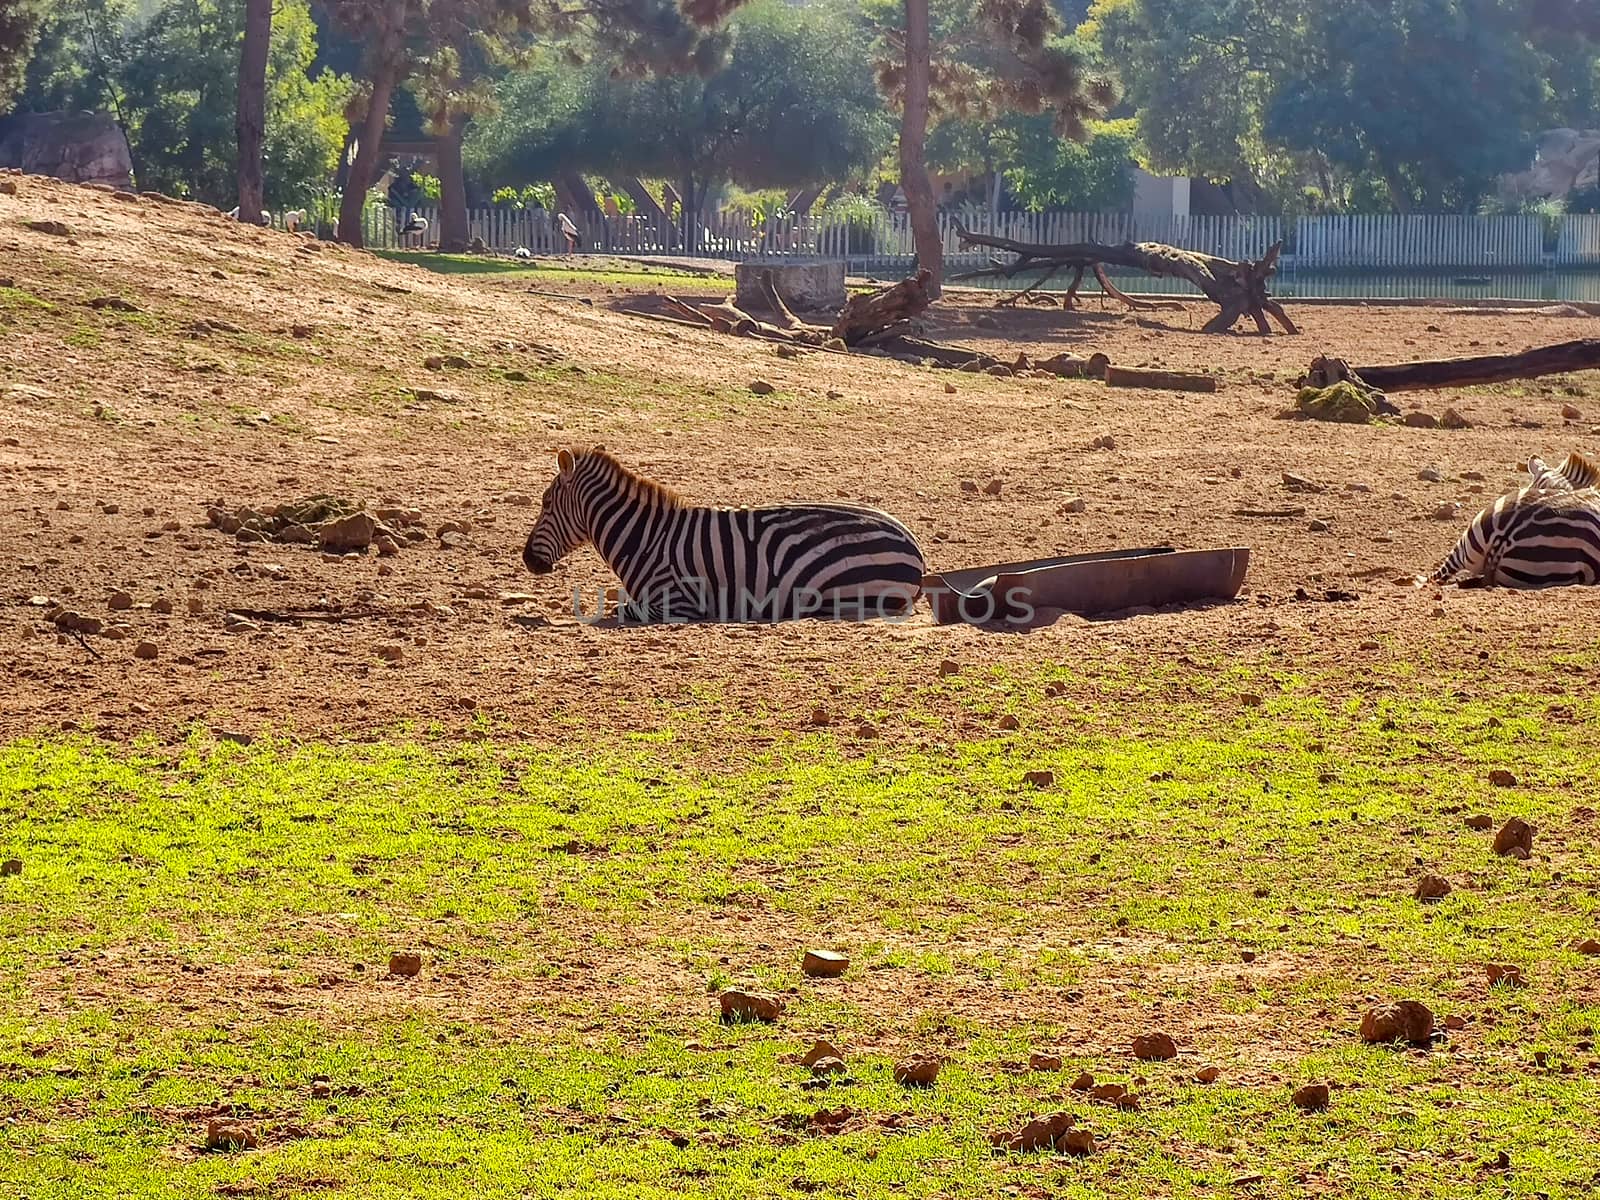 Two zebras leying down